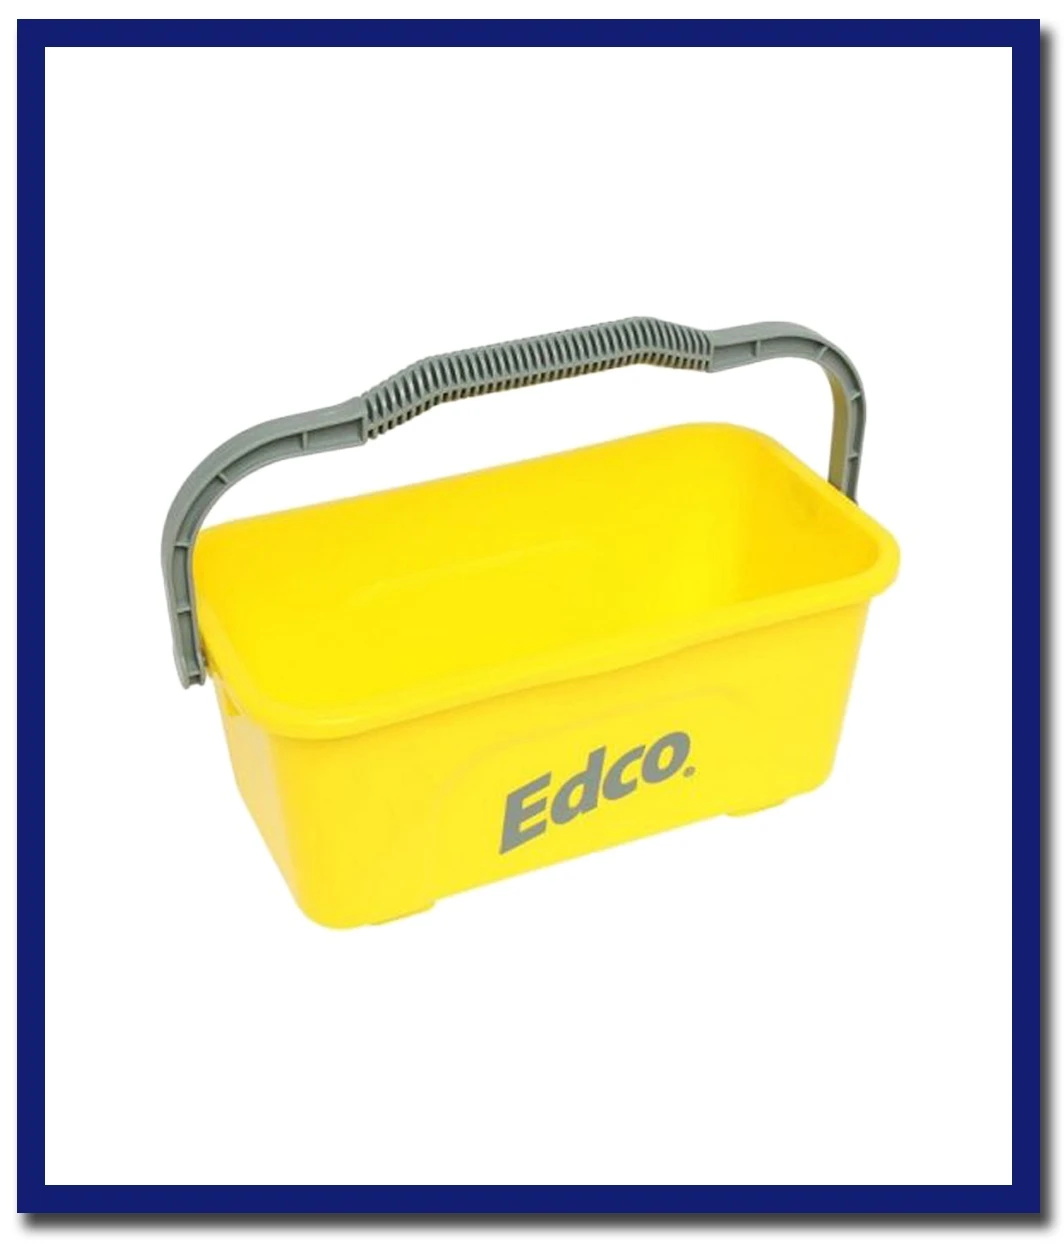 Edco All Purpose Mop & Squeegee Bucket 11LT - 1 Unit - Stone Doctor Australia - Cleaning Accessories > Mopping > Buckets